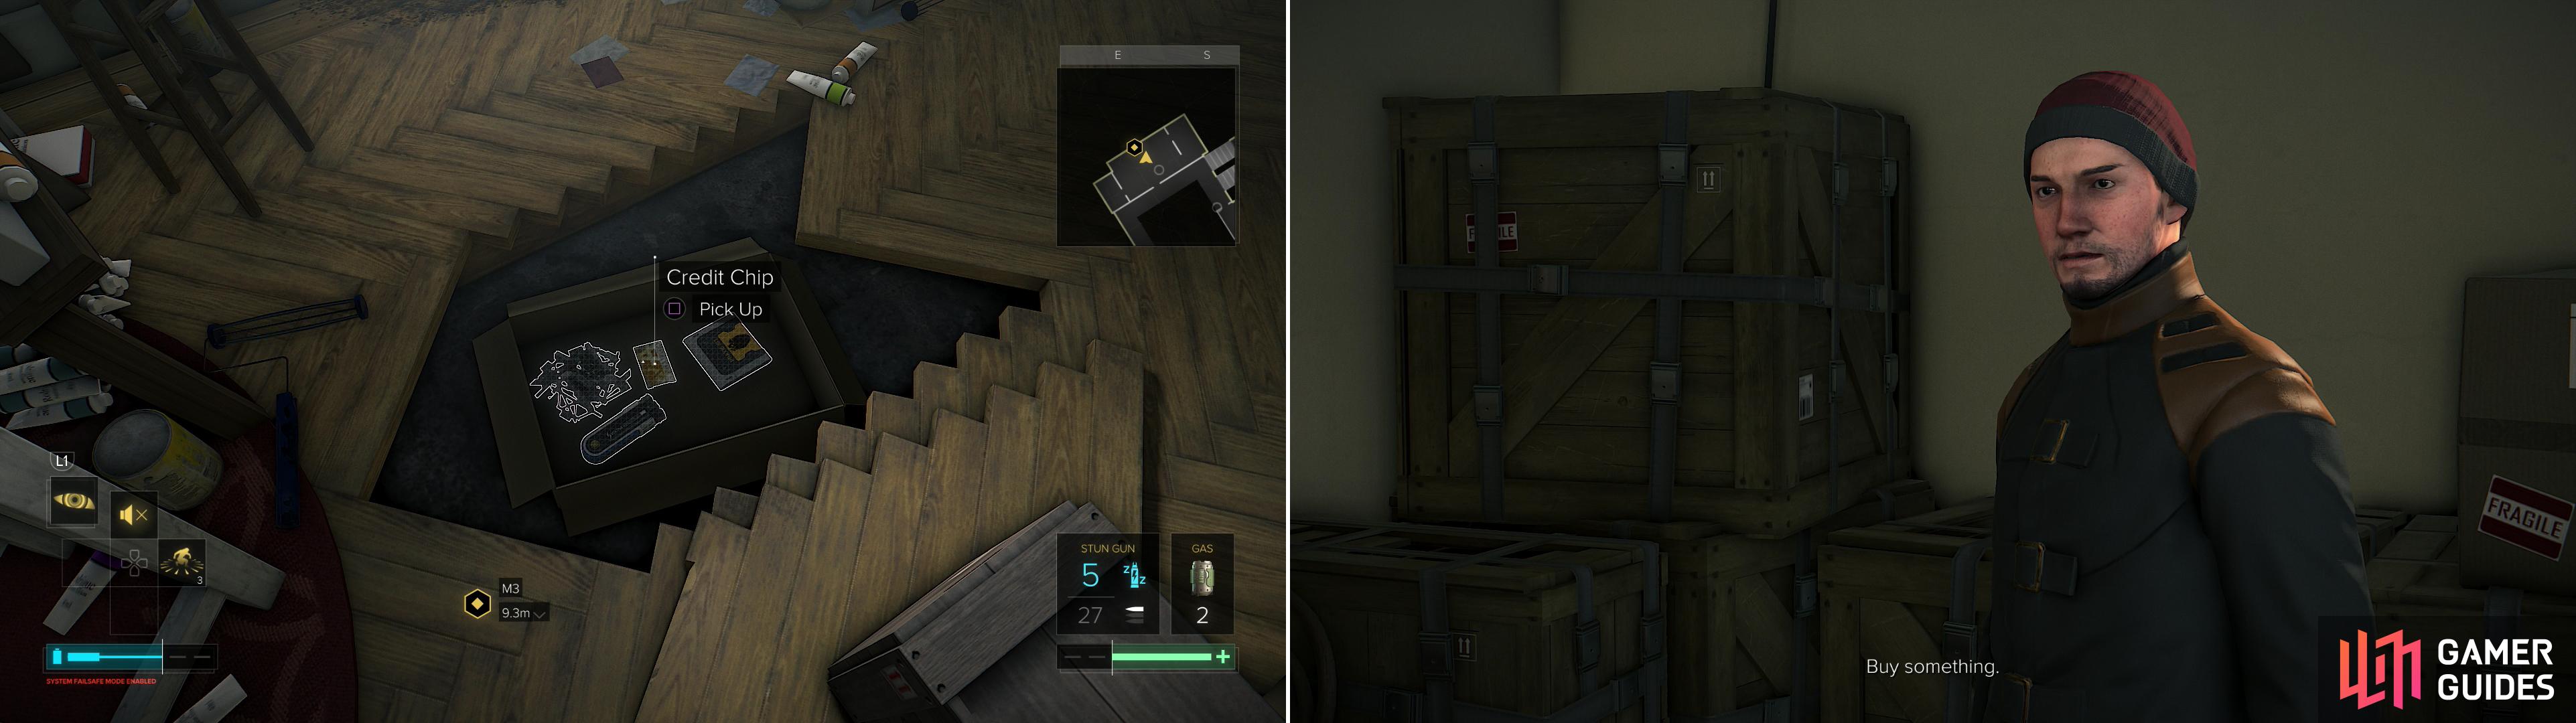 In apartment #32 you can find a hidden stash (left). Tars dwells in apartment #21. He might not be too nice, but he'll buy junk you find (right).